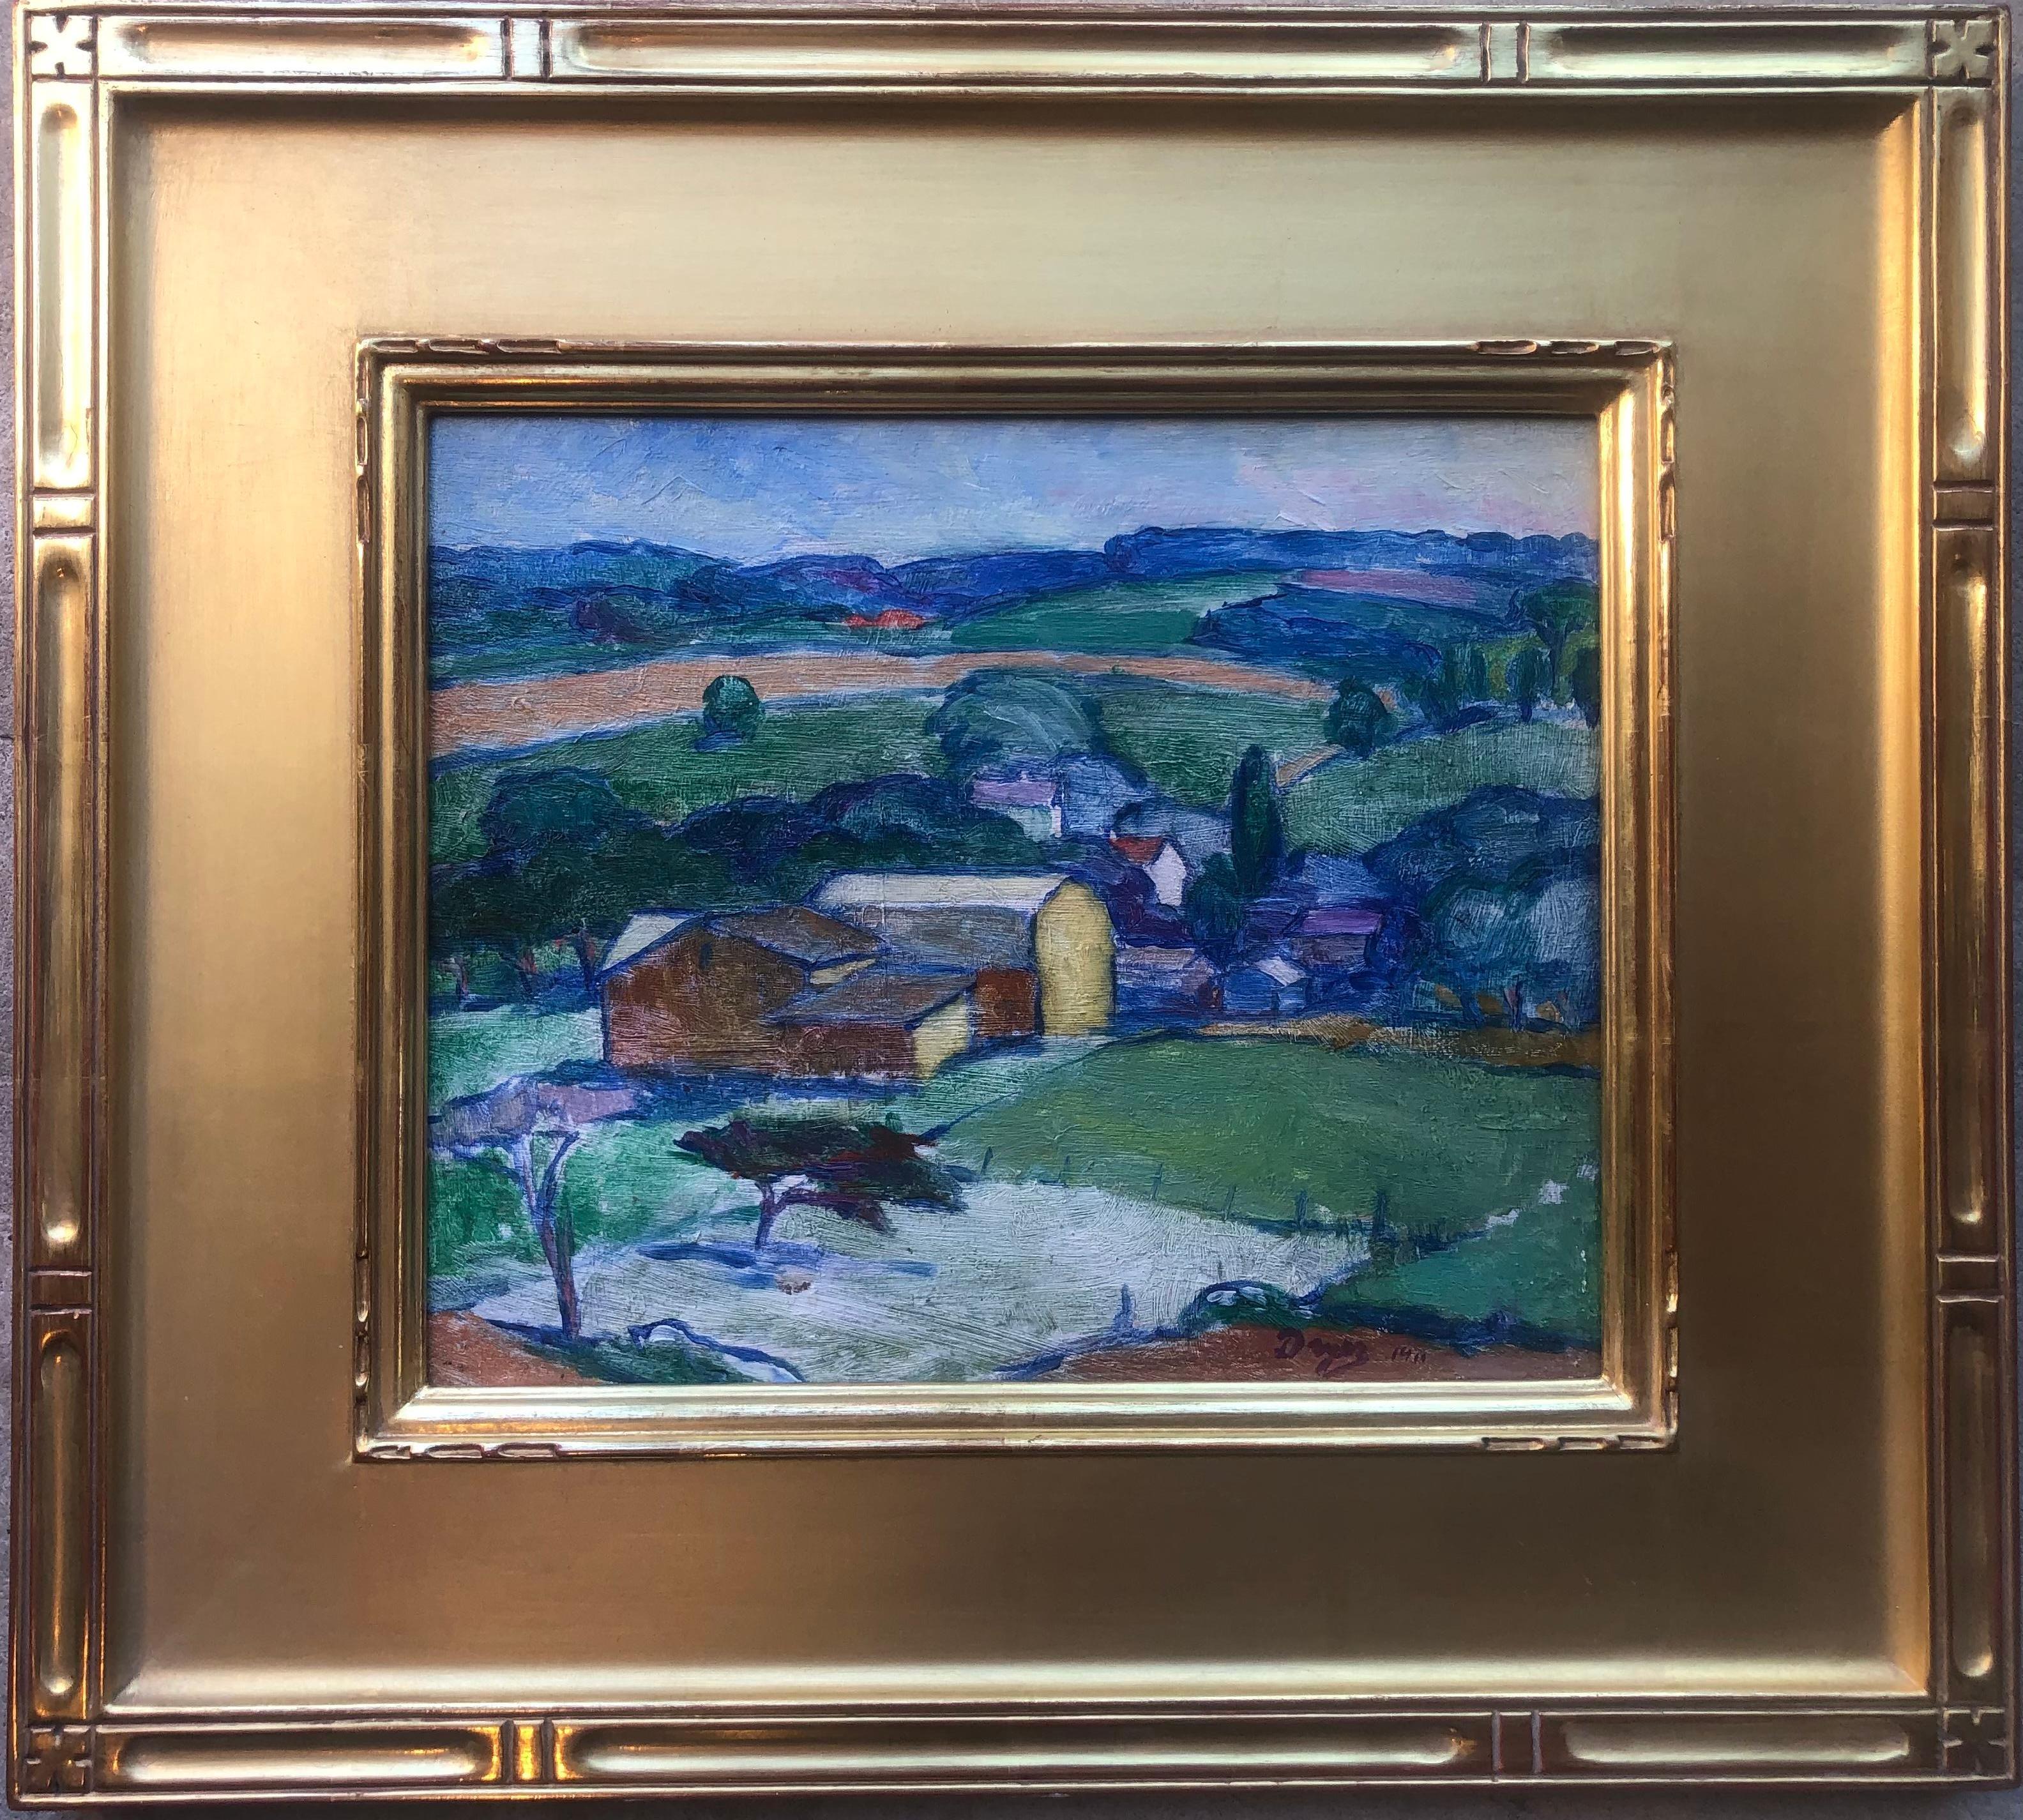  French Impressionist School O/B Landscape - 1911 - After Cezanne For Sale 2